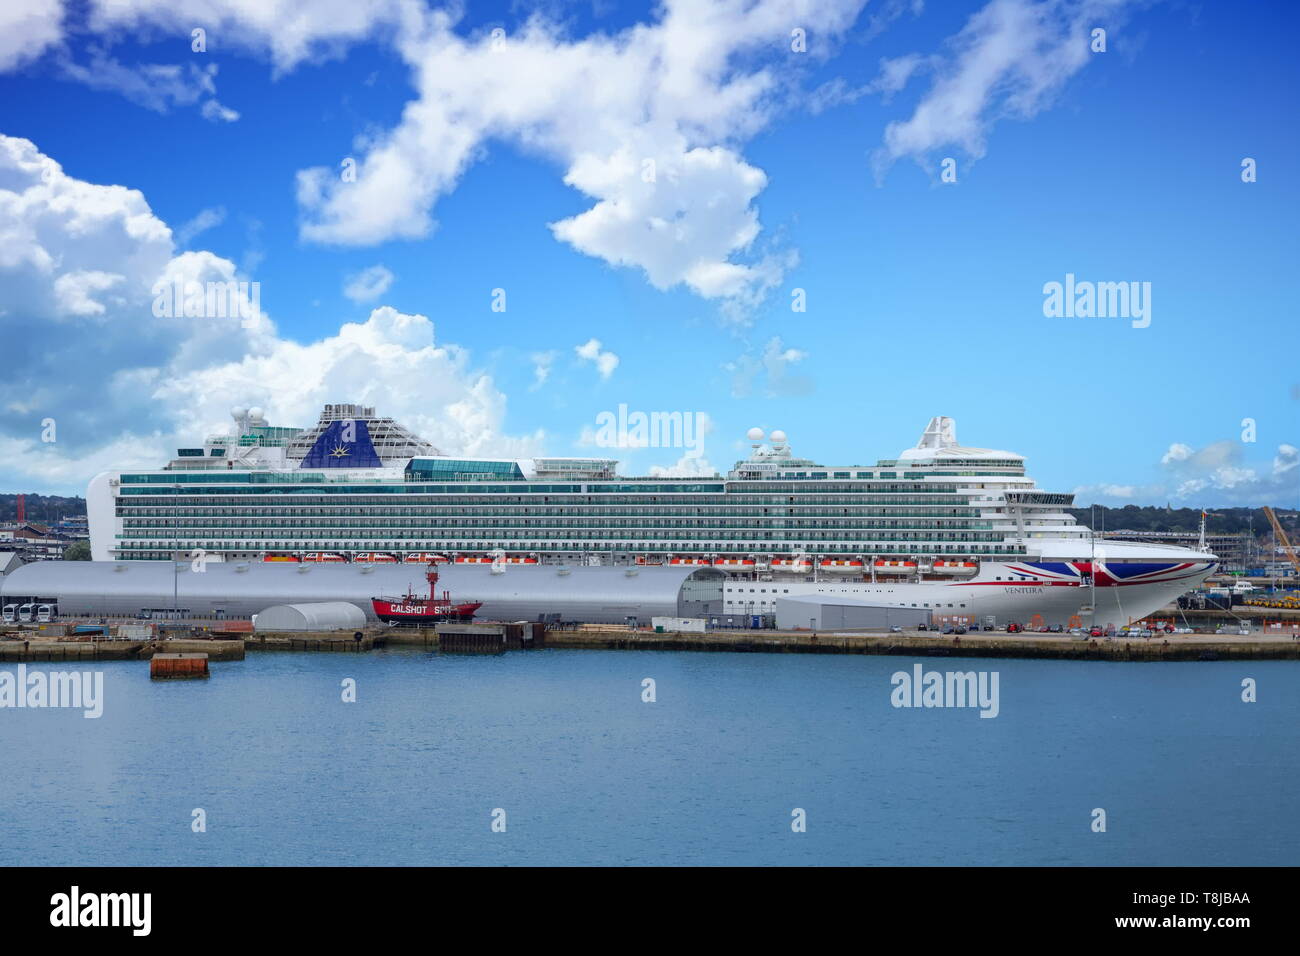 SOUTHAMPTON, ENGLAND - September 18, 2016: P O Cruises is a British cruise line based at Carnival House in Southampton, England, operated by Carnival  Stock Photo